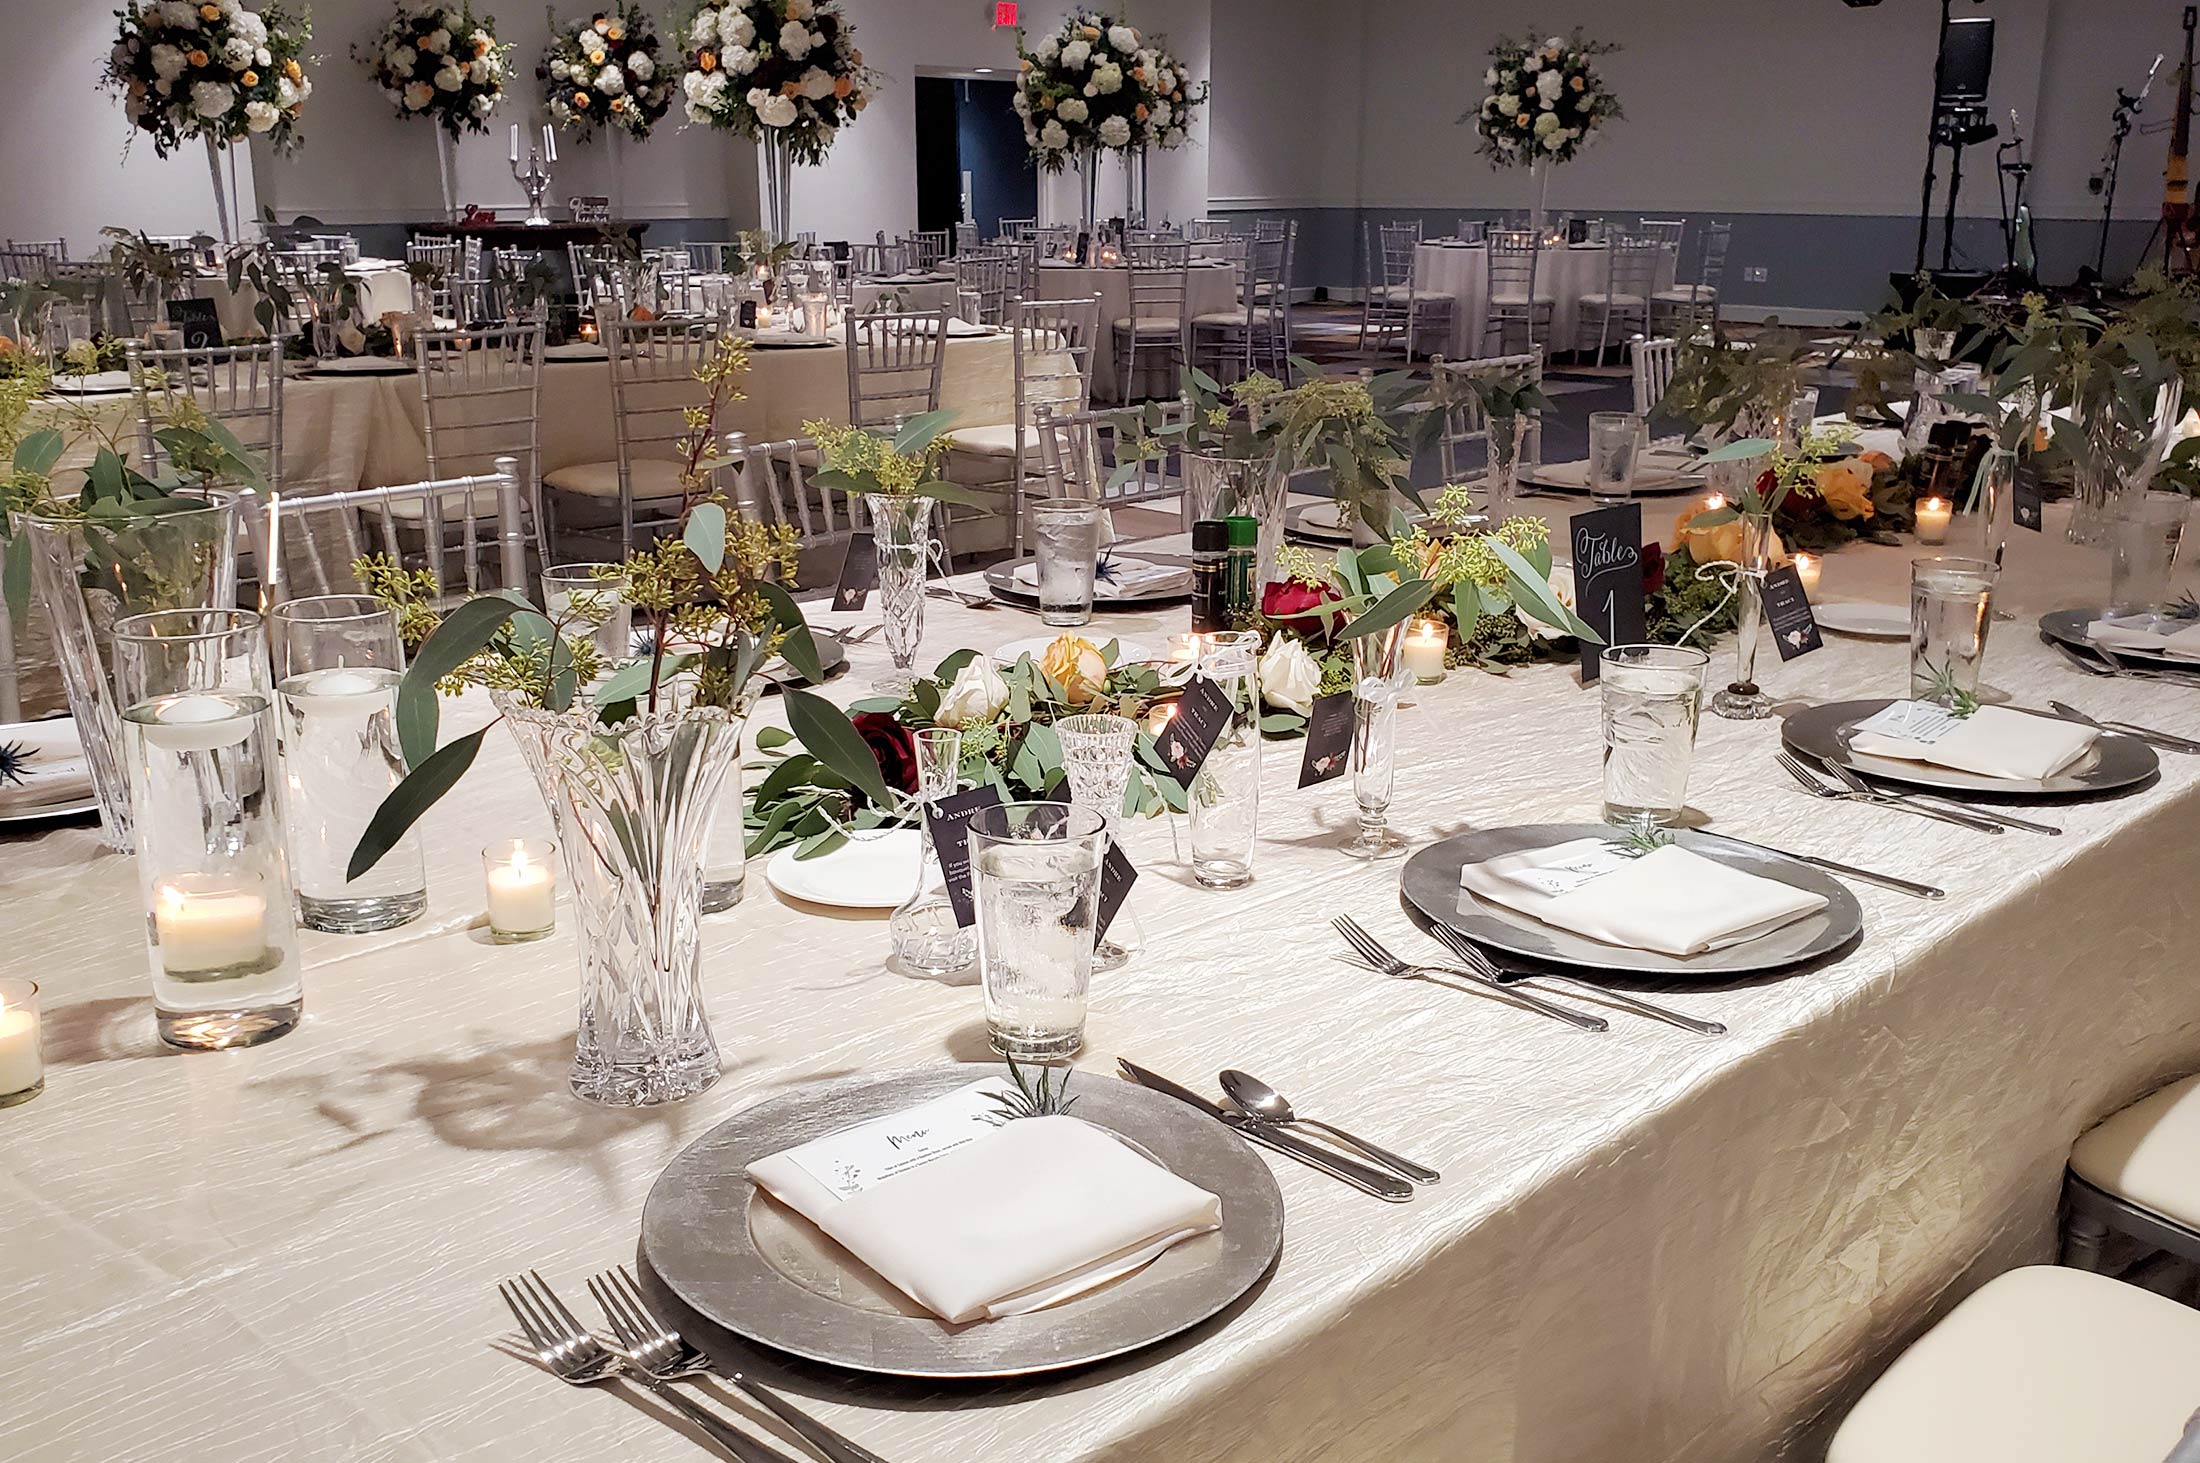 dining in ballroom at reception, plate and table arrangements